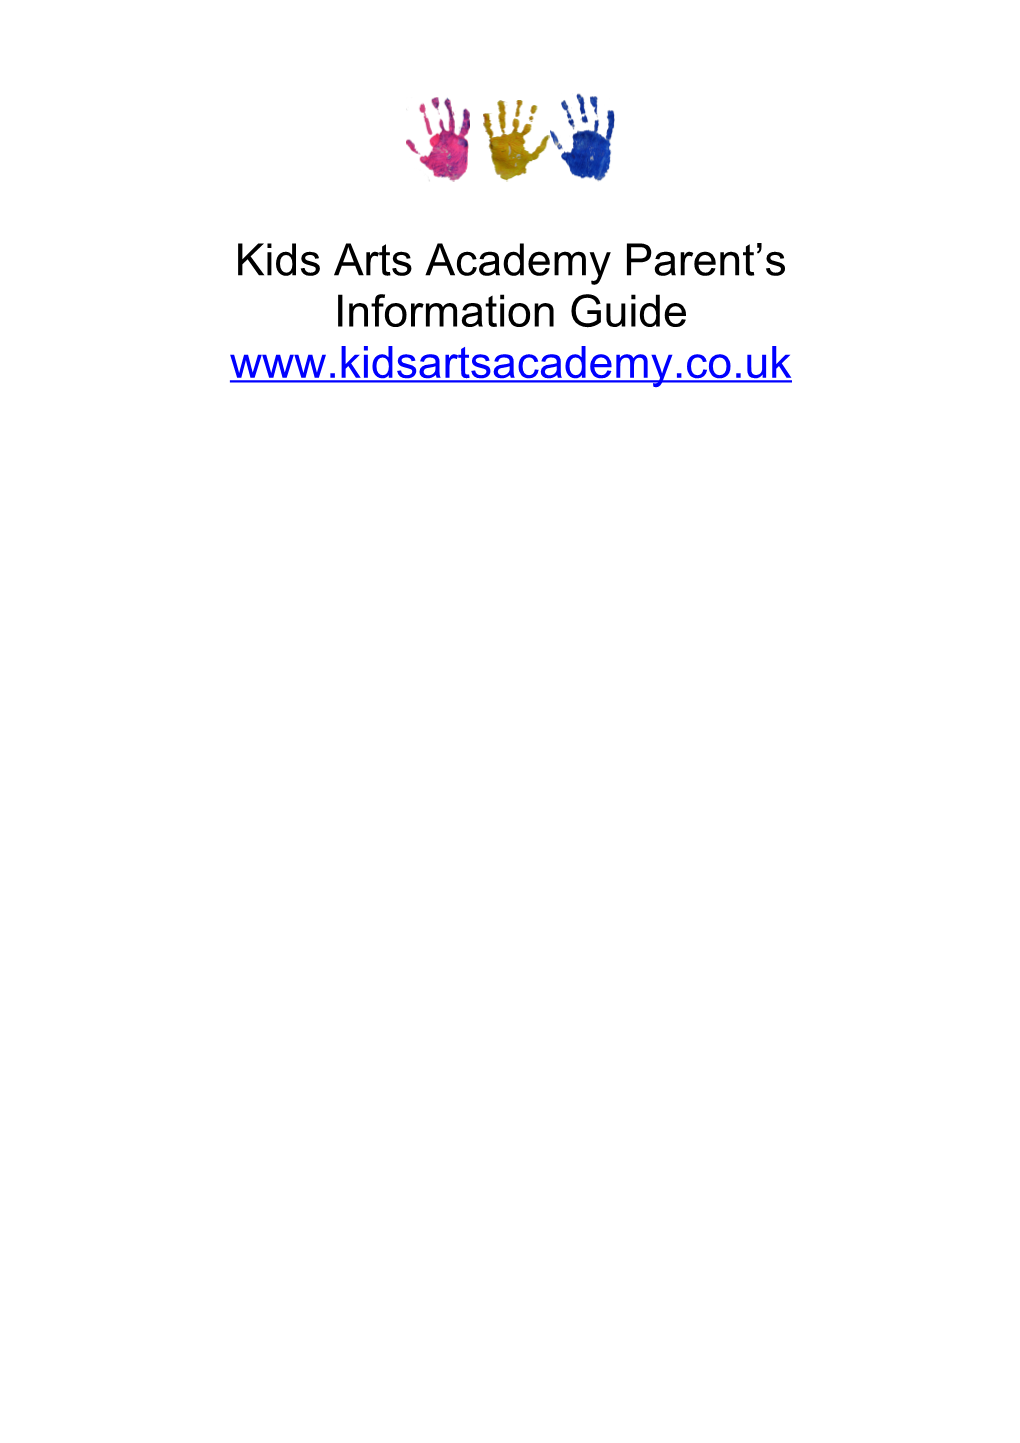 Parent Info for the Kids Arts Academy